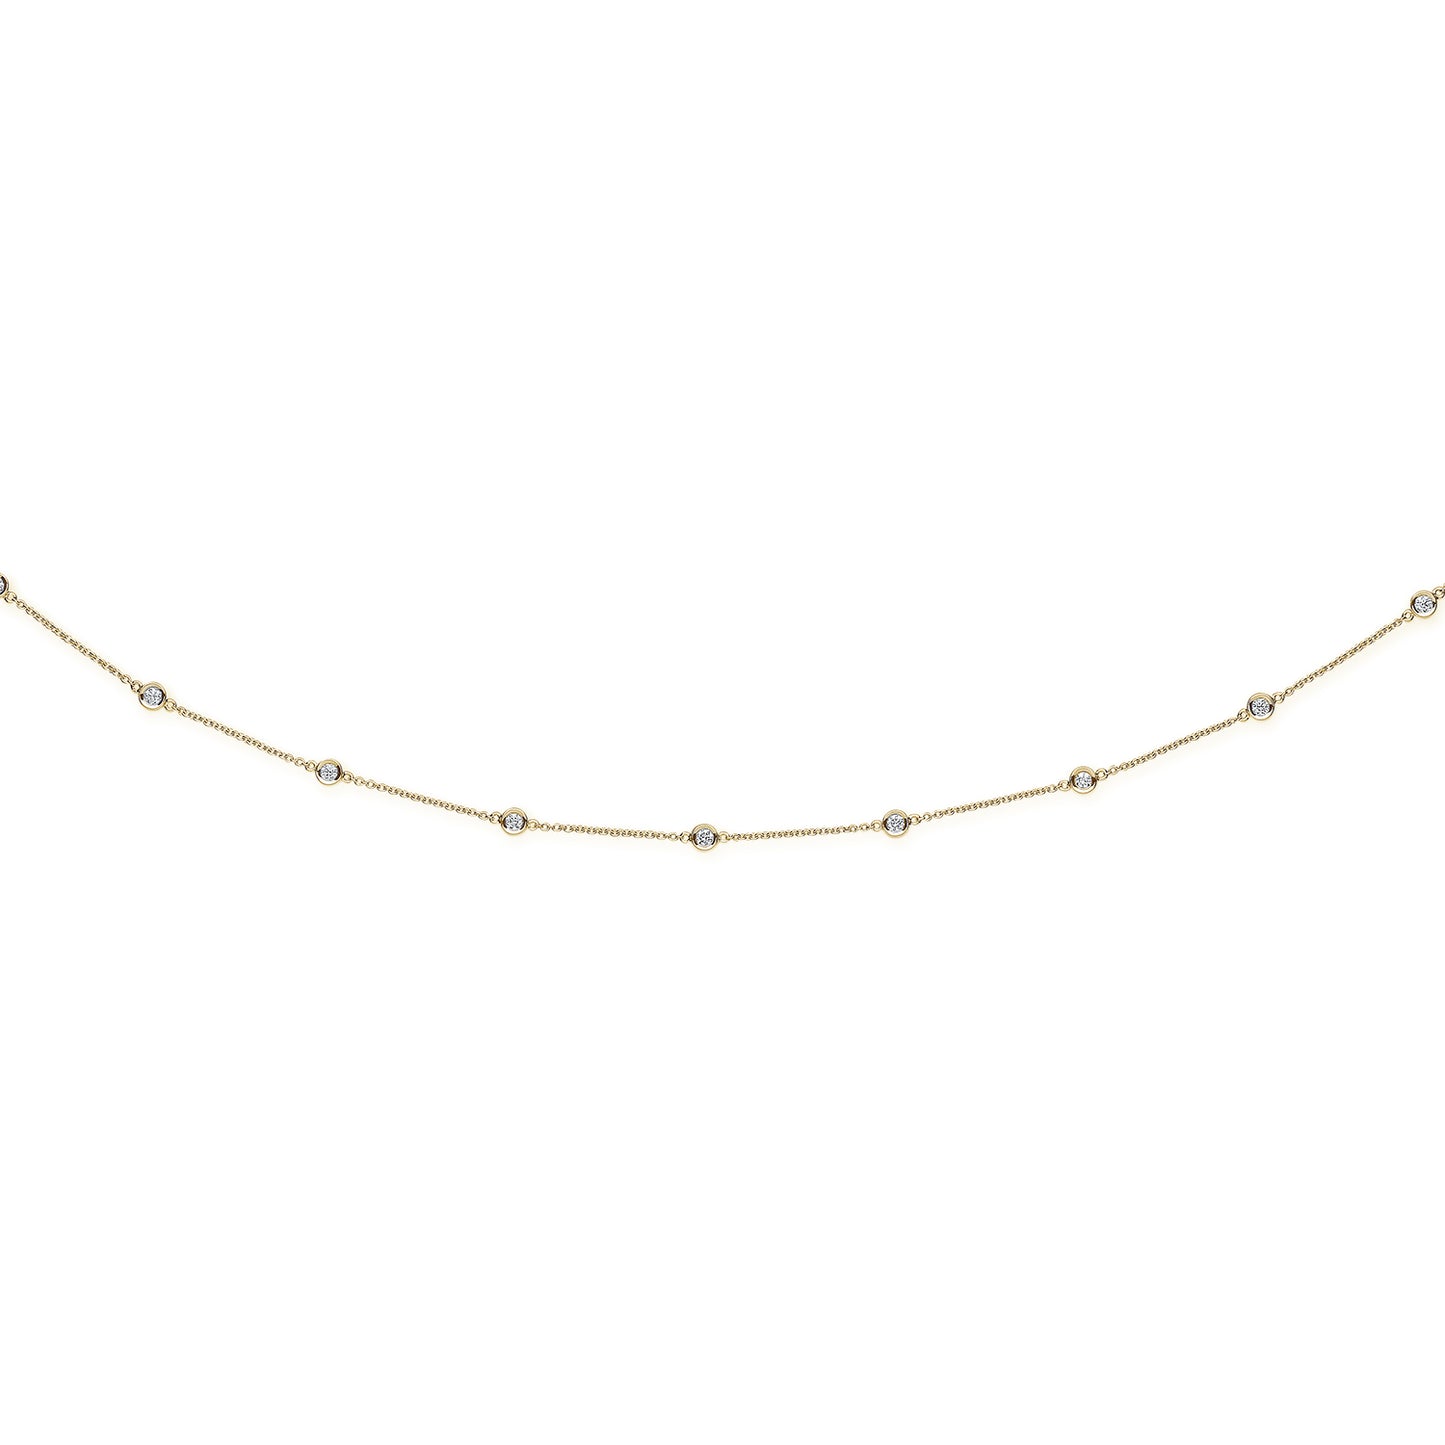 18ct Gold 2.04ct Diamond by the yard Necklace (36in/91cm)